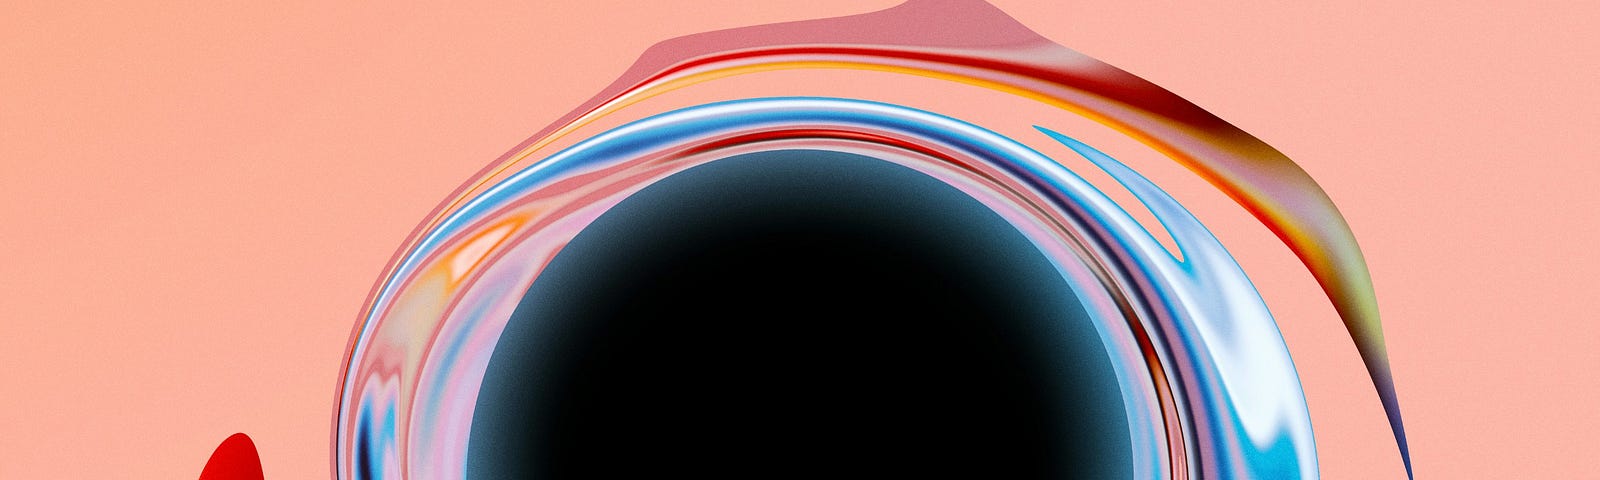 A spiraling swirl of colors (shades of blue and red) wrapping around — in a clockwise fashion — a black circle, all against a palish pink background.